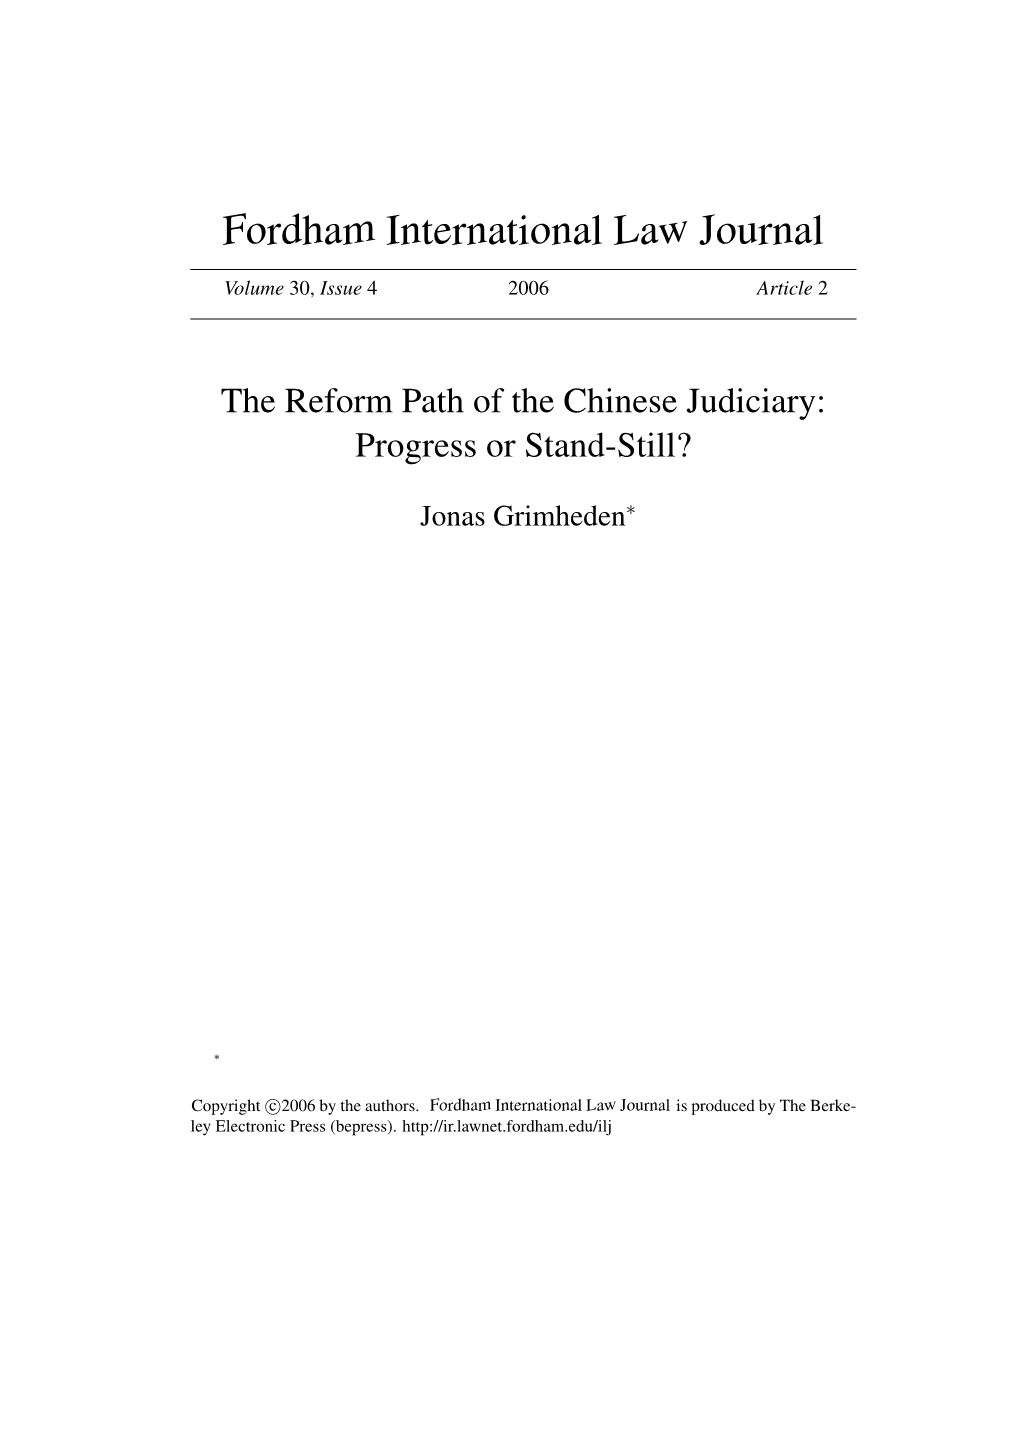 The Reform Path of the Chinese Judiciary: Progress Or Stand-Still?